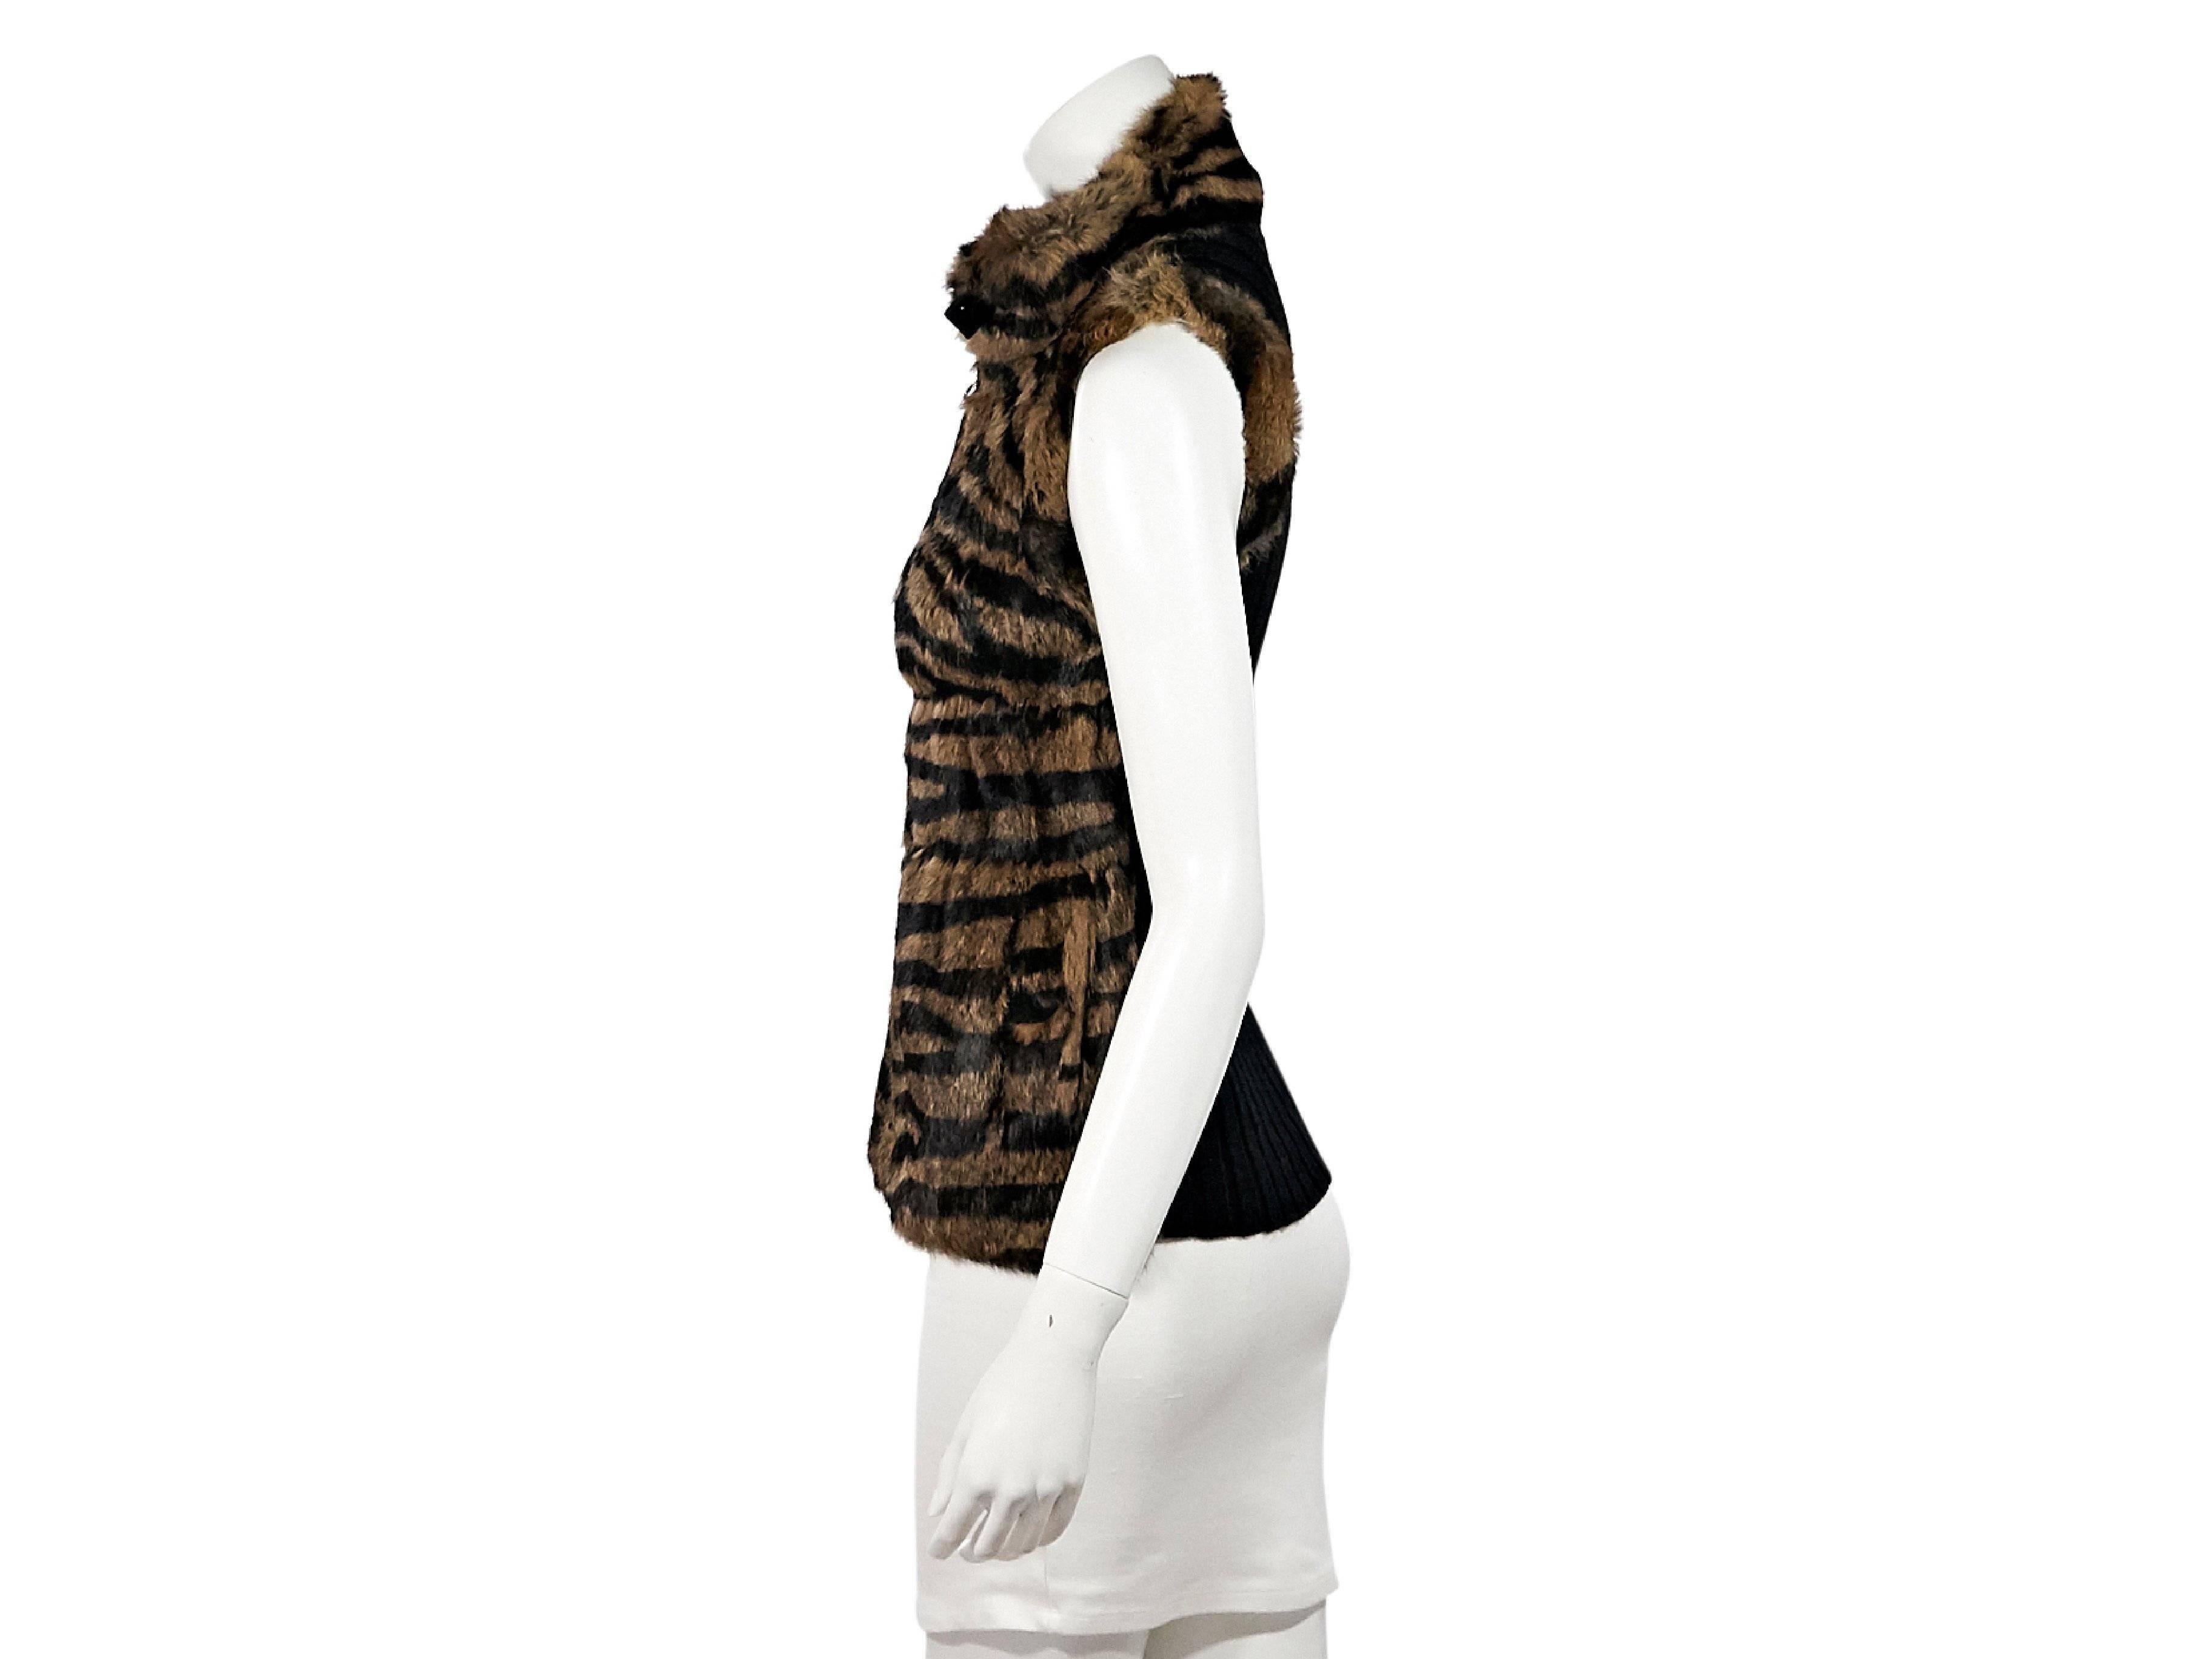 Product details:  Brown and black printed rabbit fur-front vest by Jocelyn.  Stand collar.  Zip-front closure.  Ribbed knit back.  
Condition: Pre-owned. Very good.
Est. Retail $ 625.00